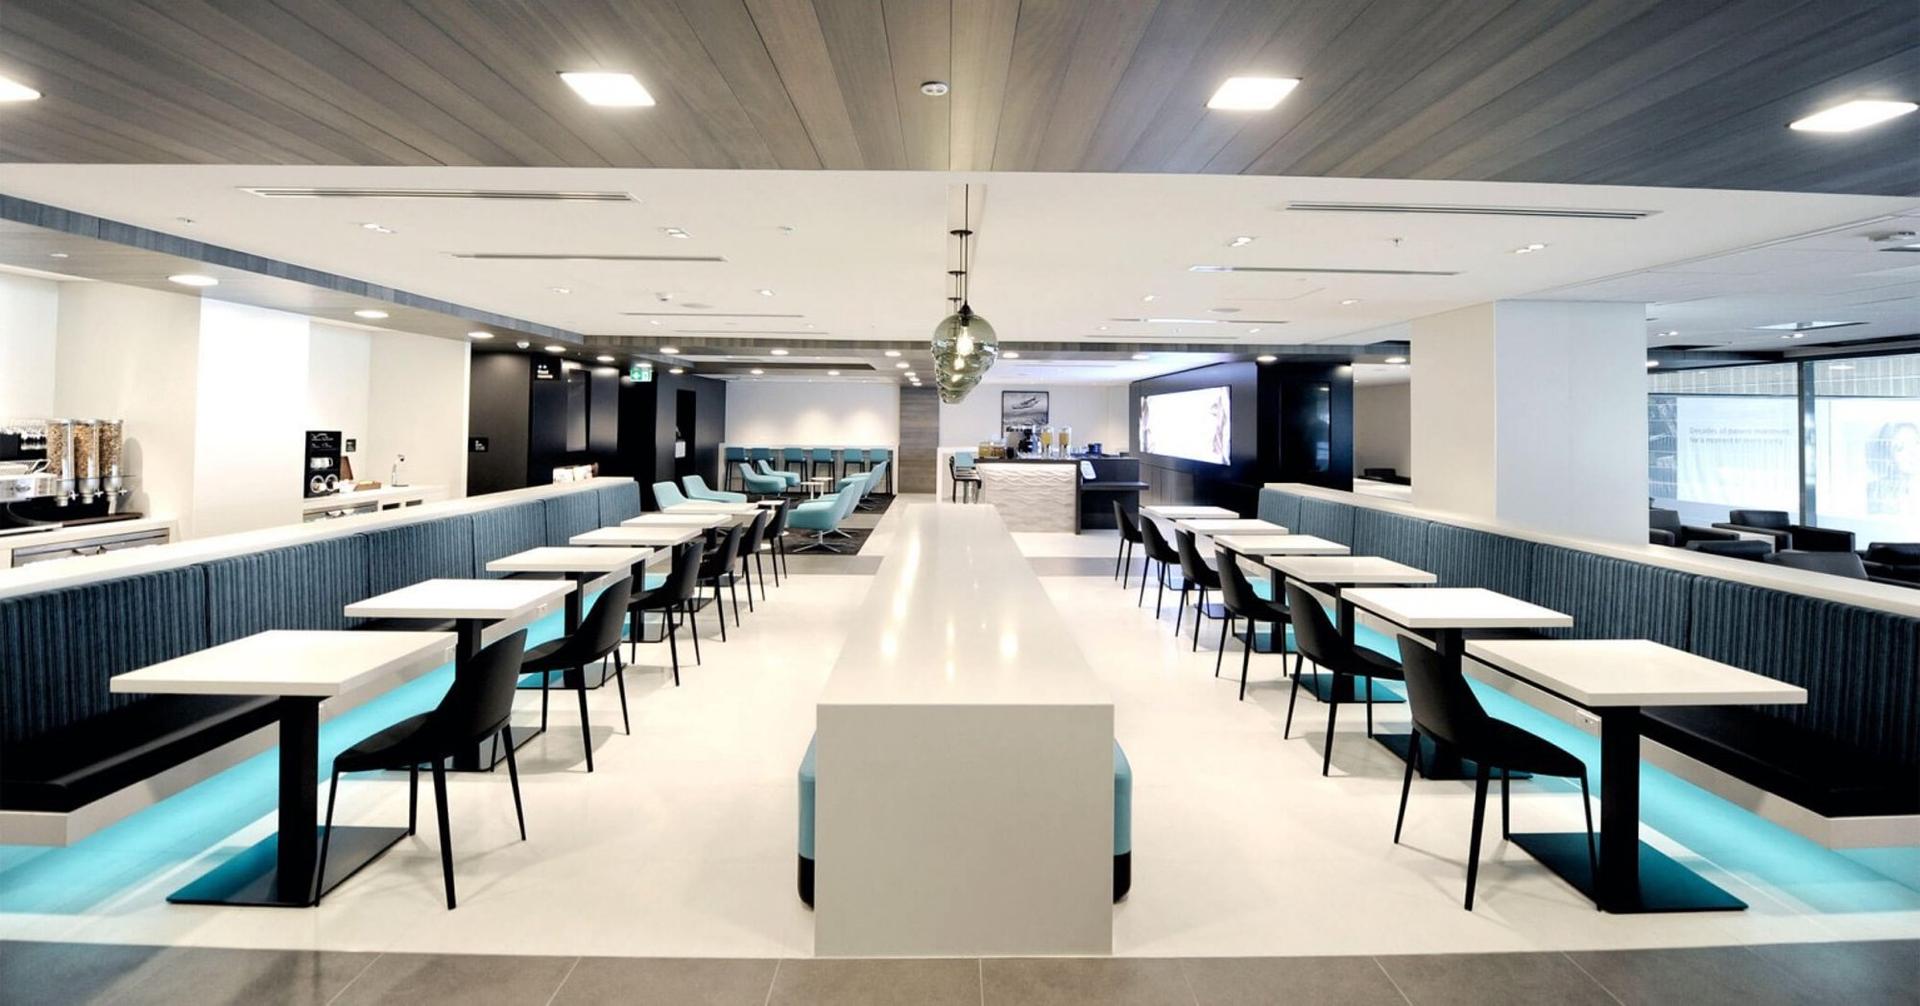 Air New Zealand Regional Lounge image 1 of 8